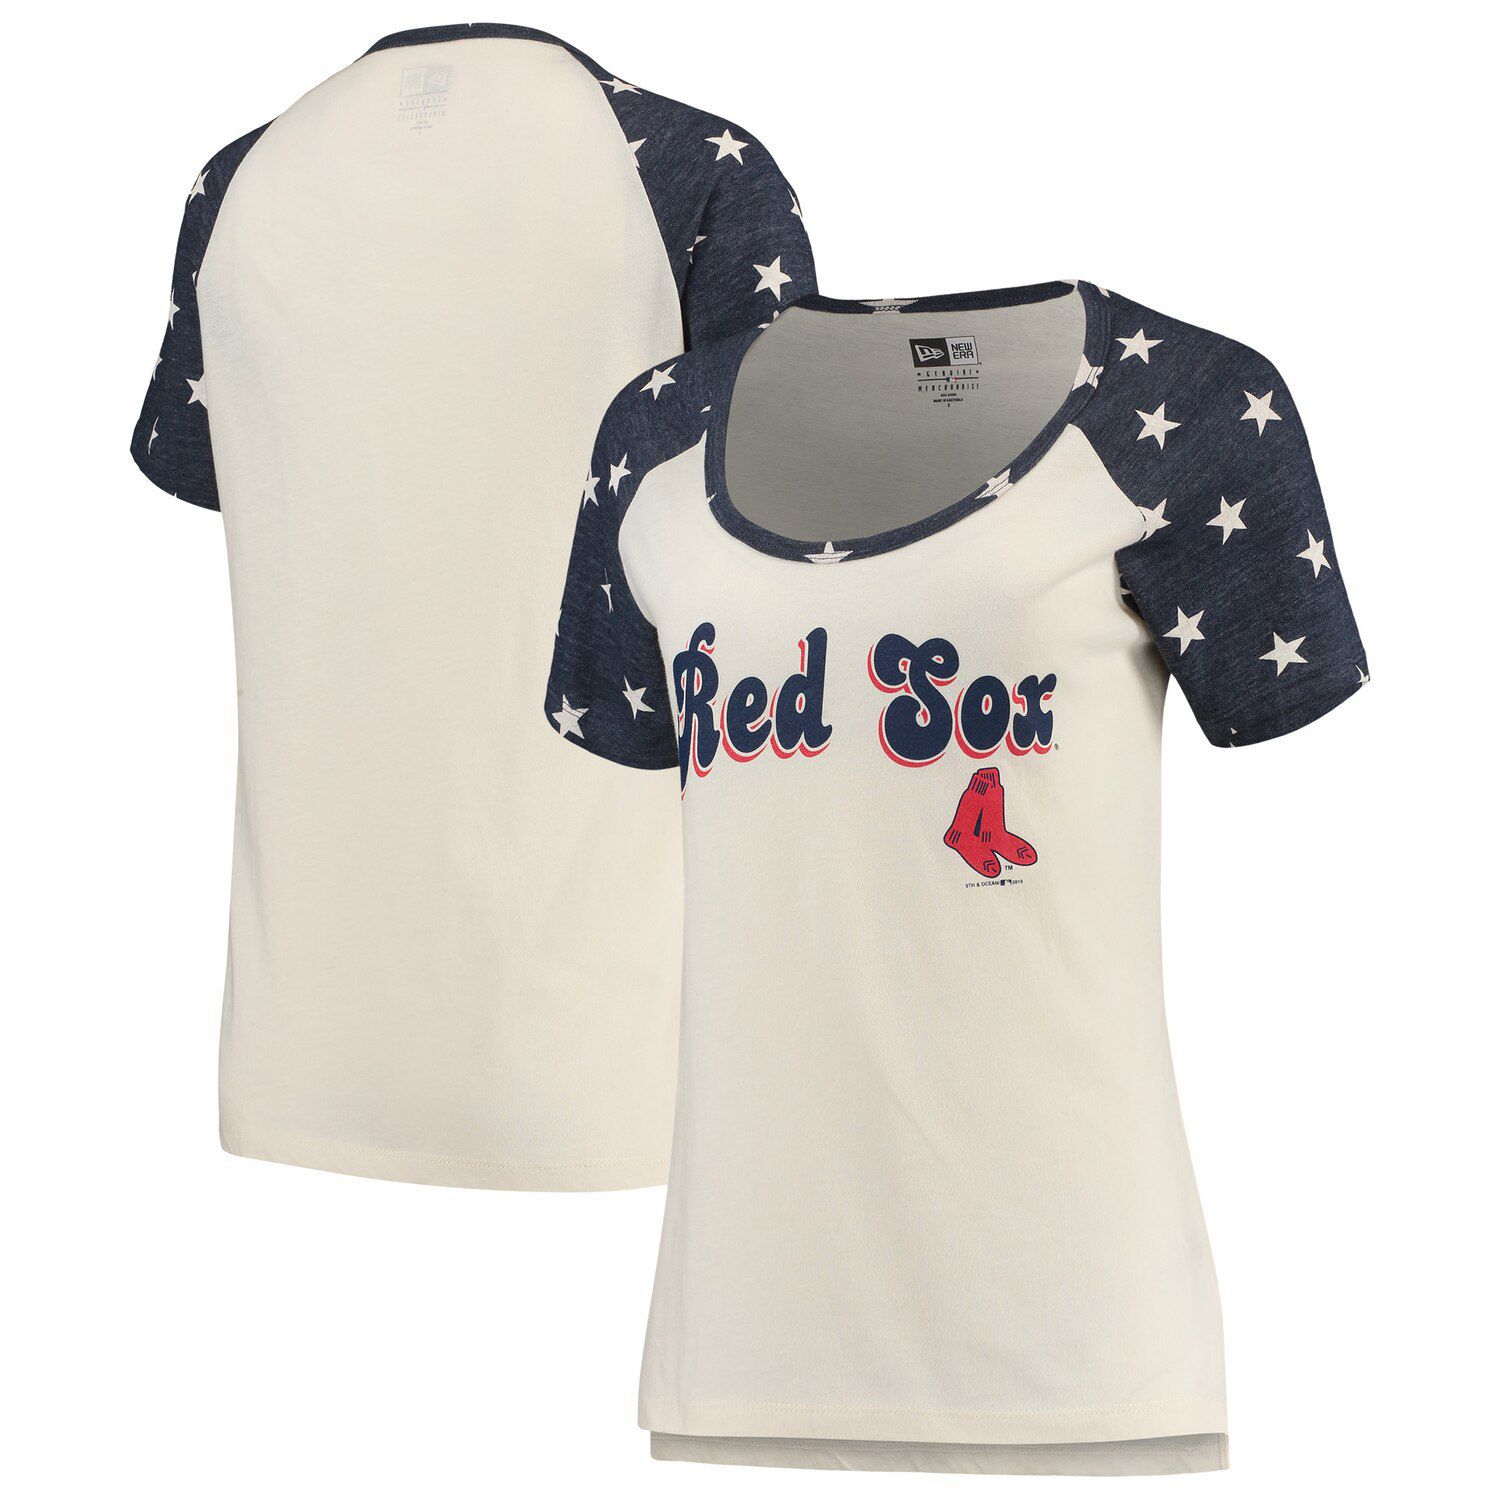 boston red sox baby jersey